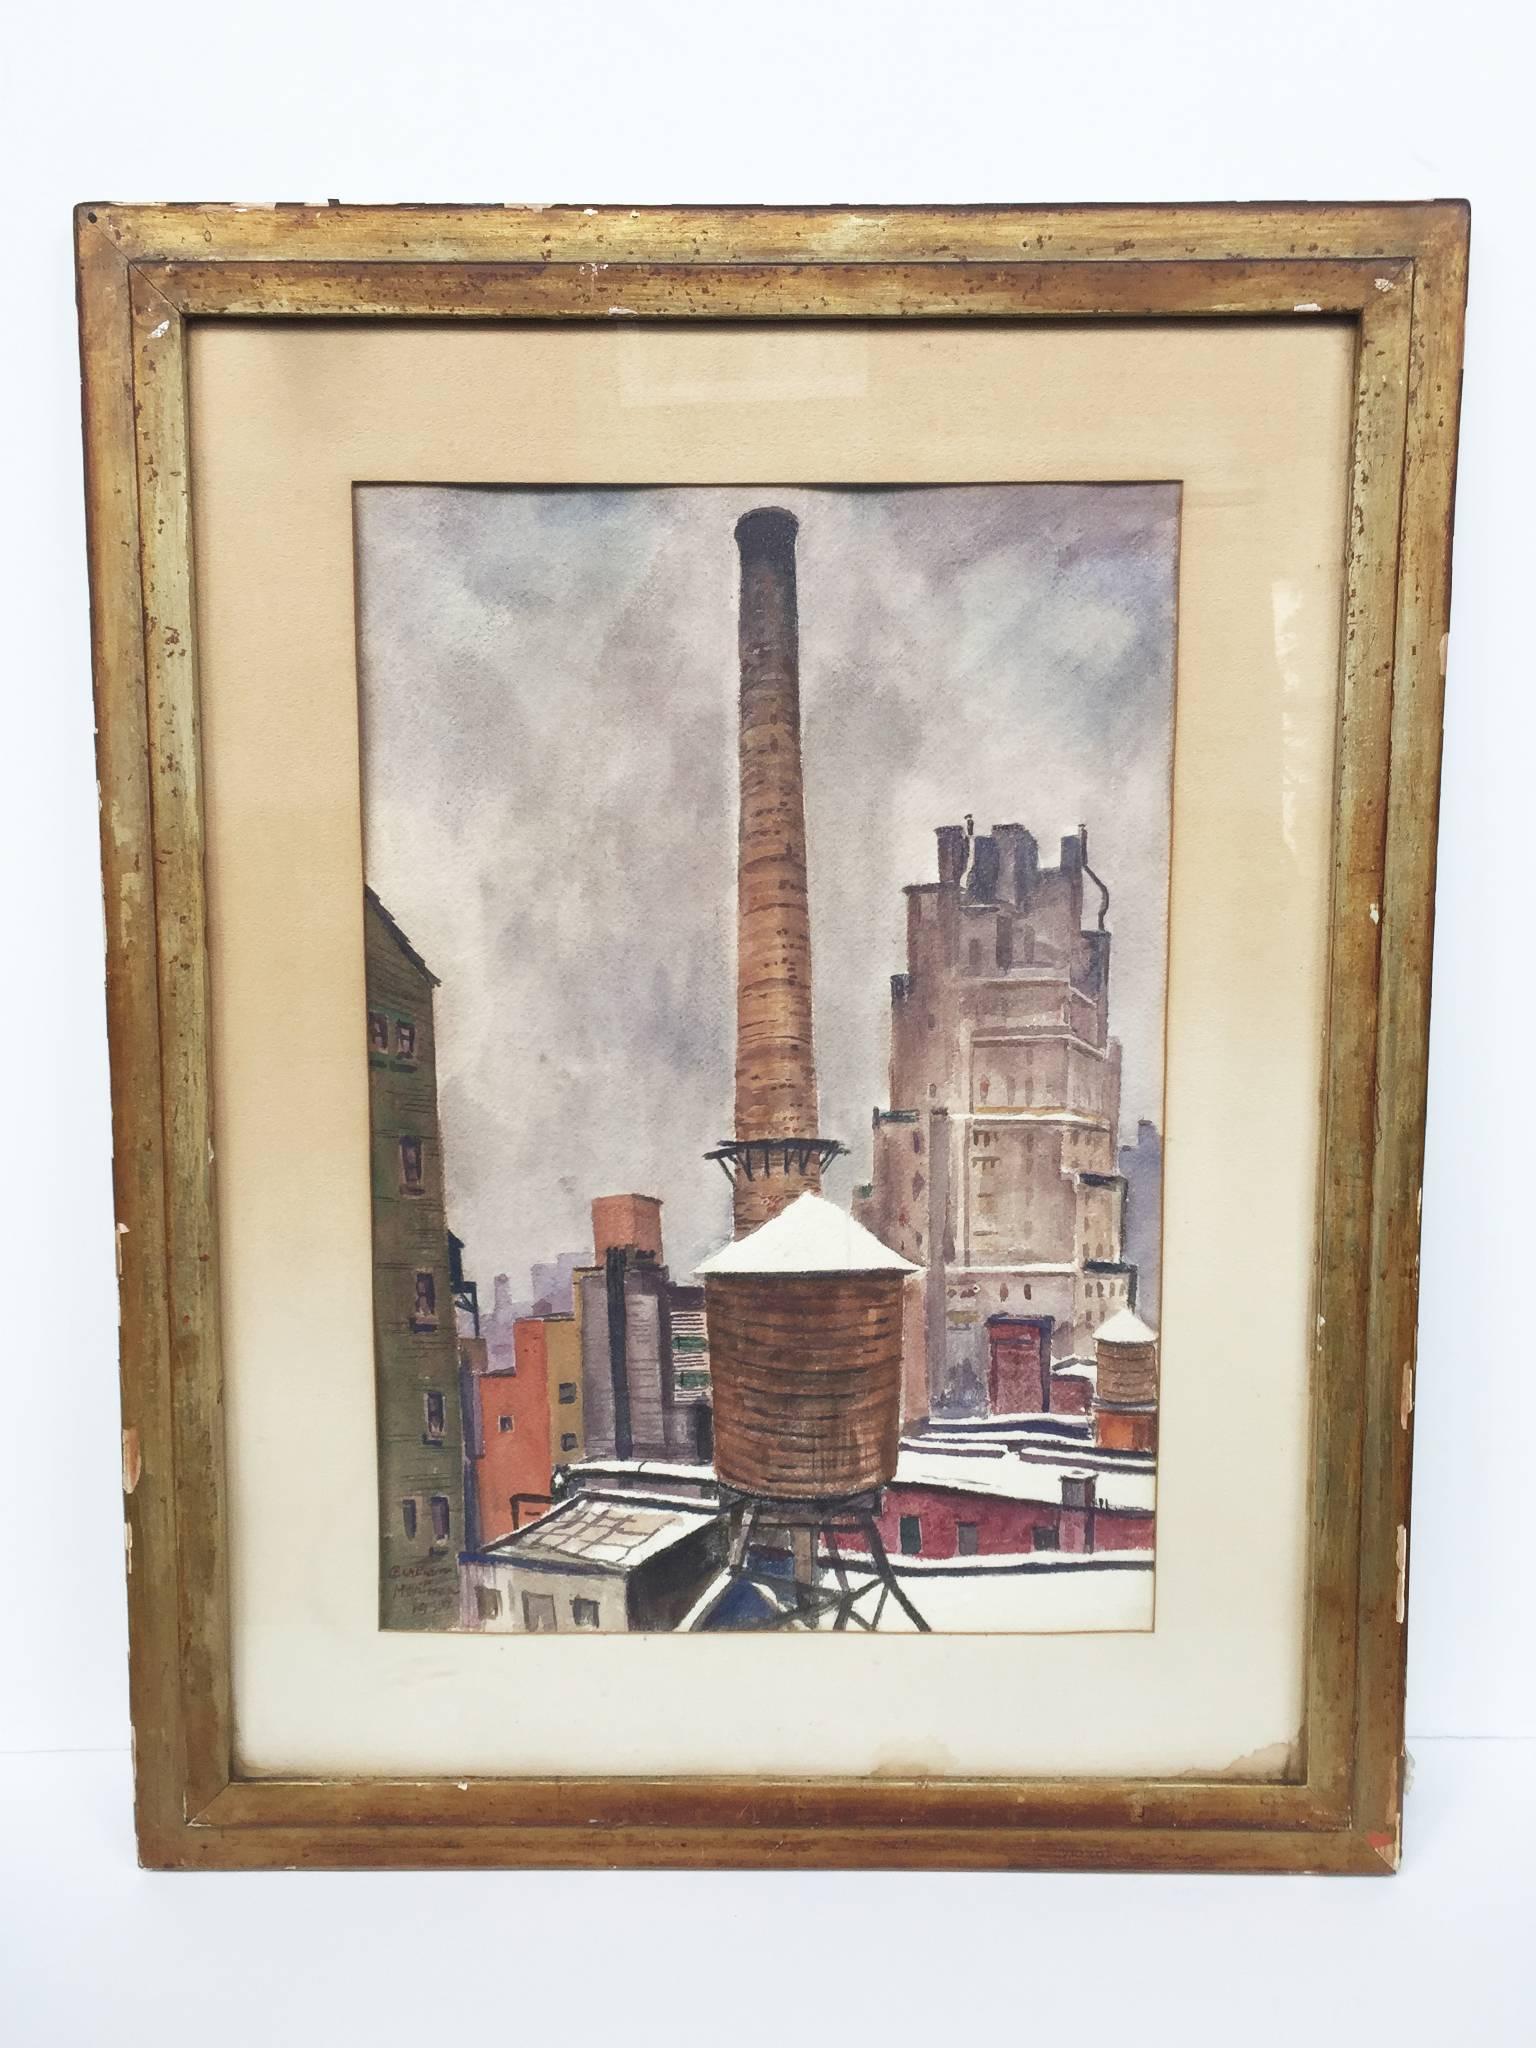 This watercolor cityscape was created by the Kansas-born American modernist, Bertram Hartman (1882-1960). He studied art at the Art Institute of Chicago and, like many of his fellow American artists before him, in Europe. Hartman painted cityscapes